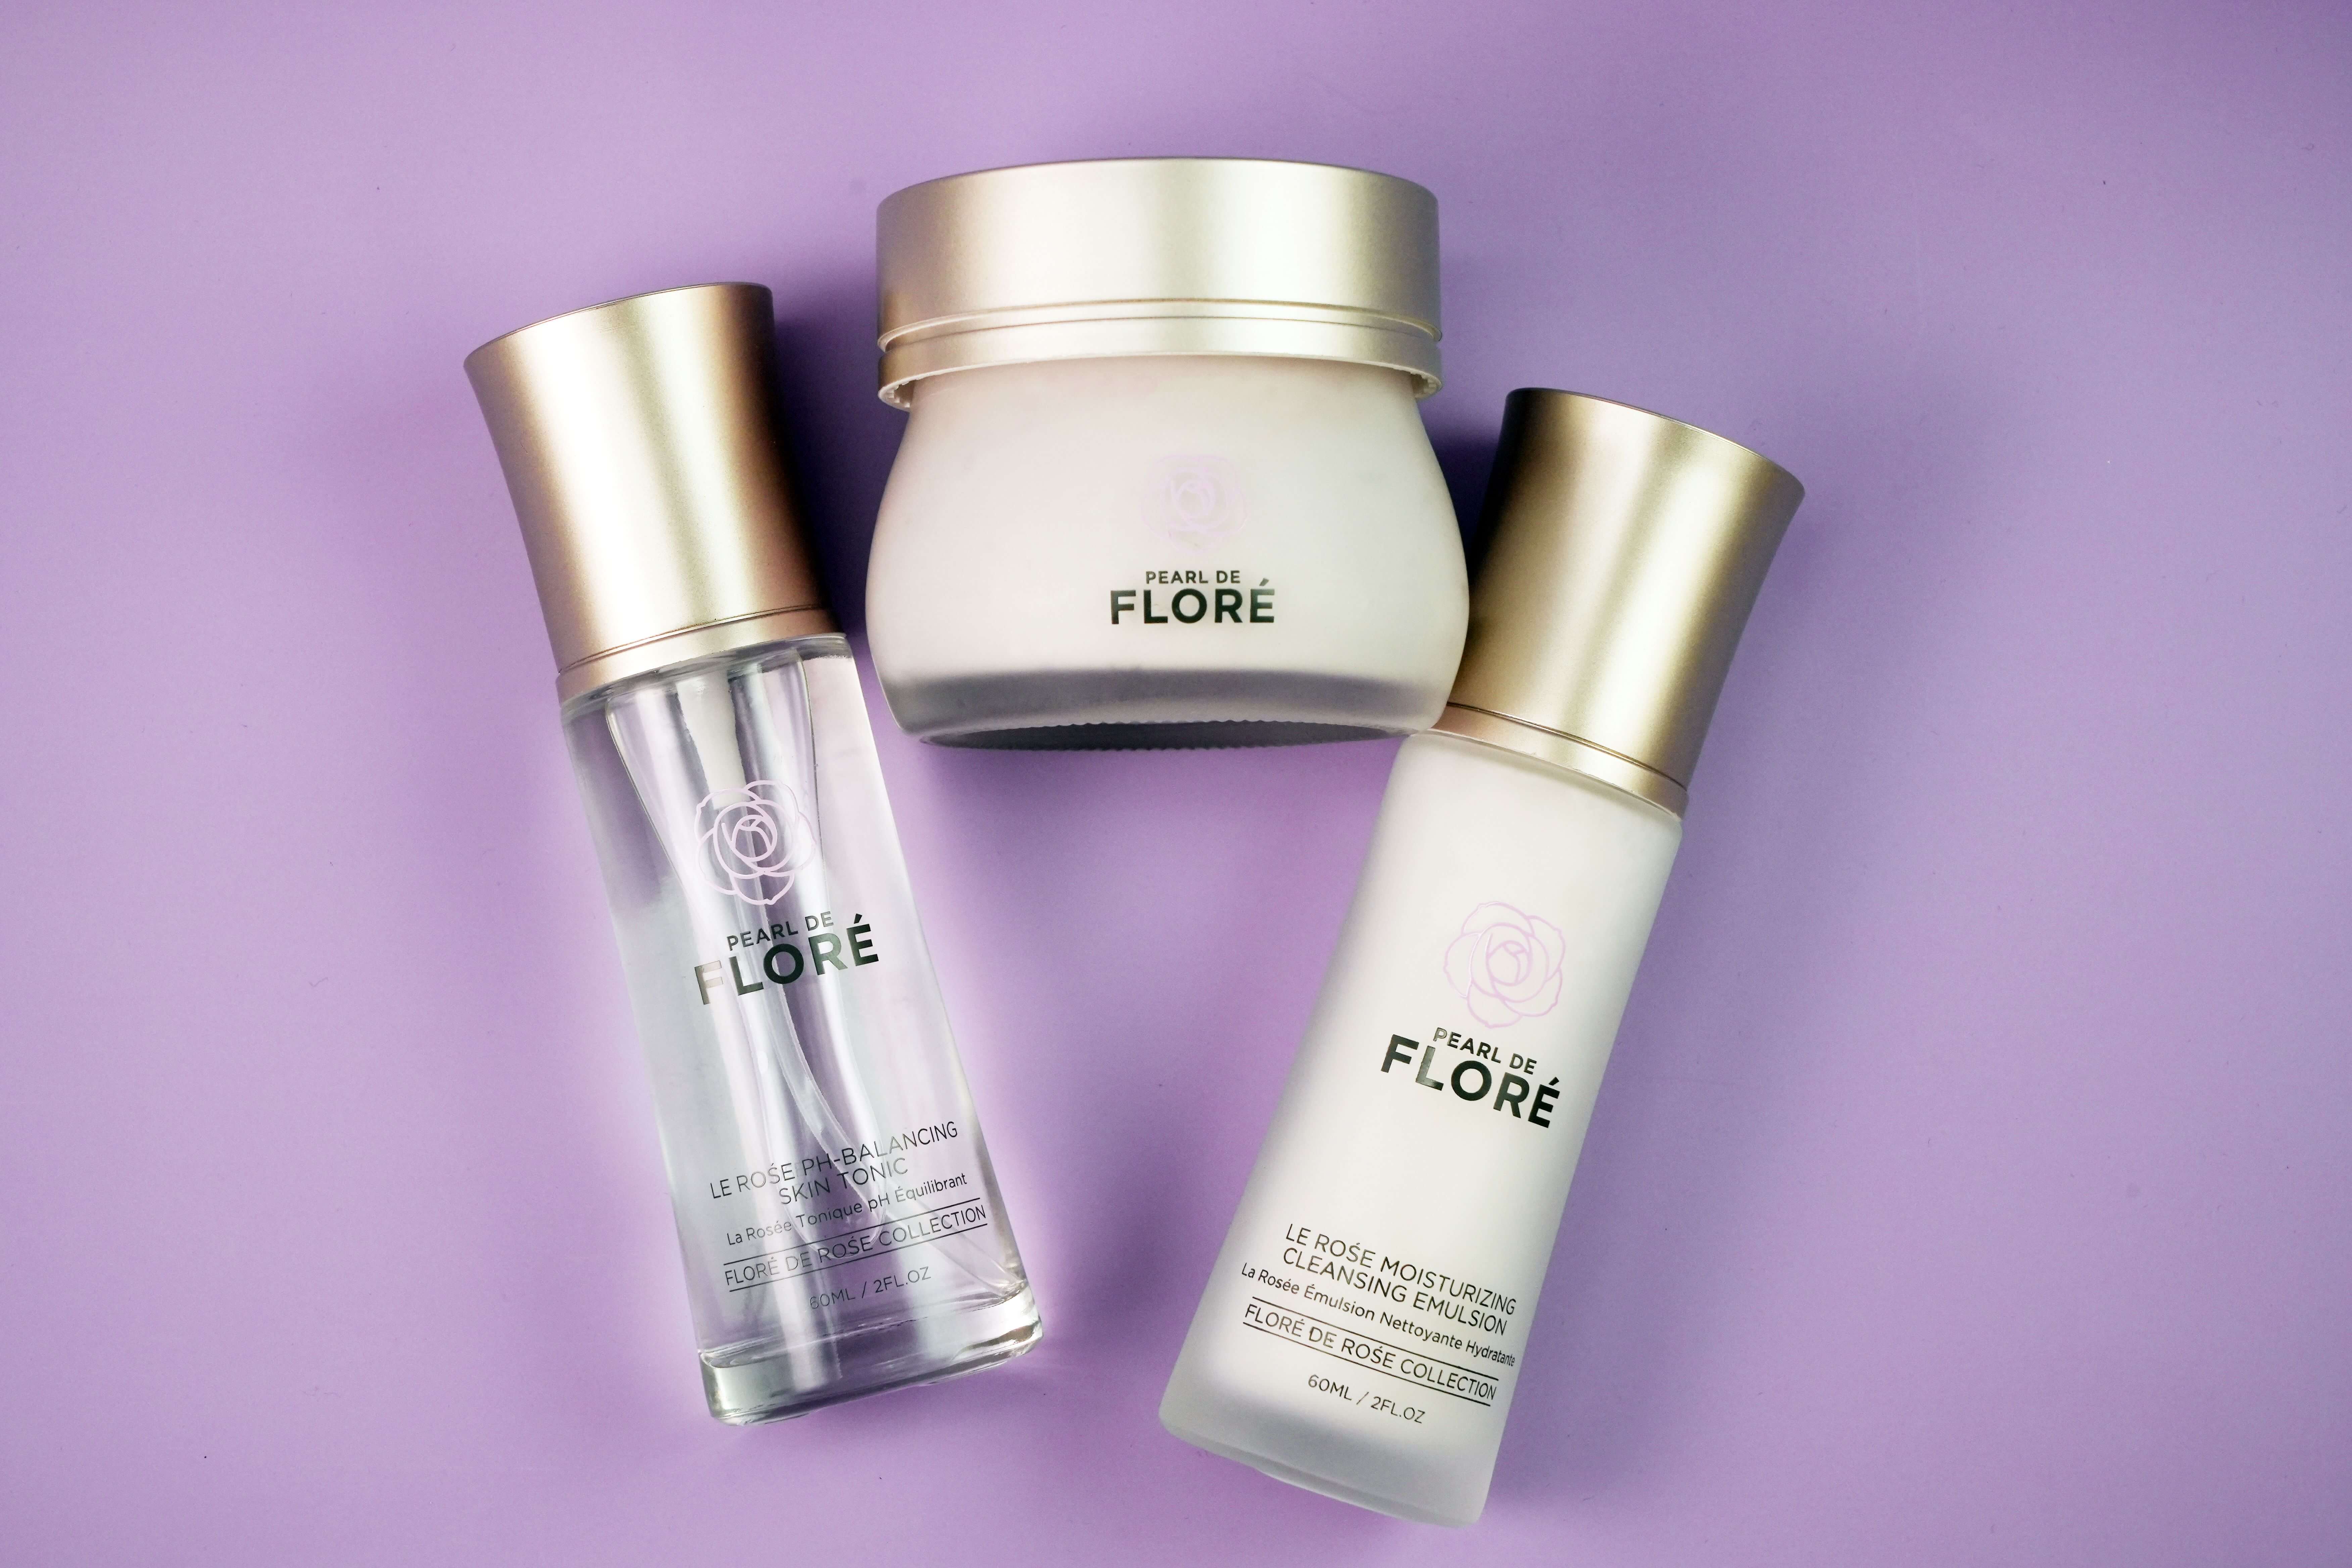 A Closer Look at 3 of the Flower-Infused Skincare Products From Pearl de Flore